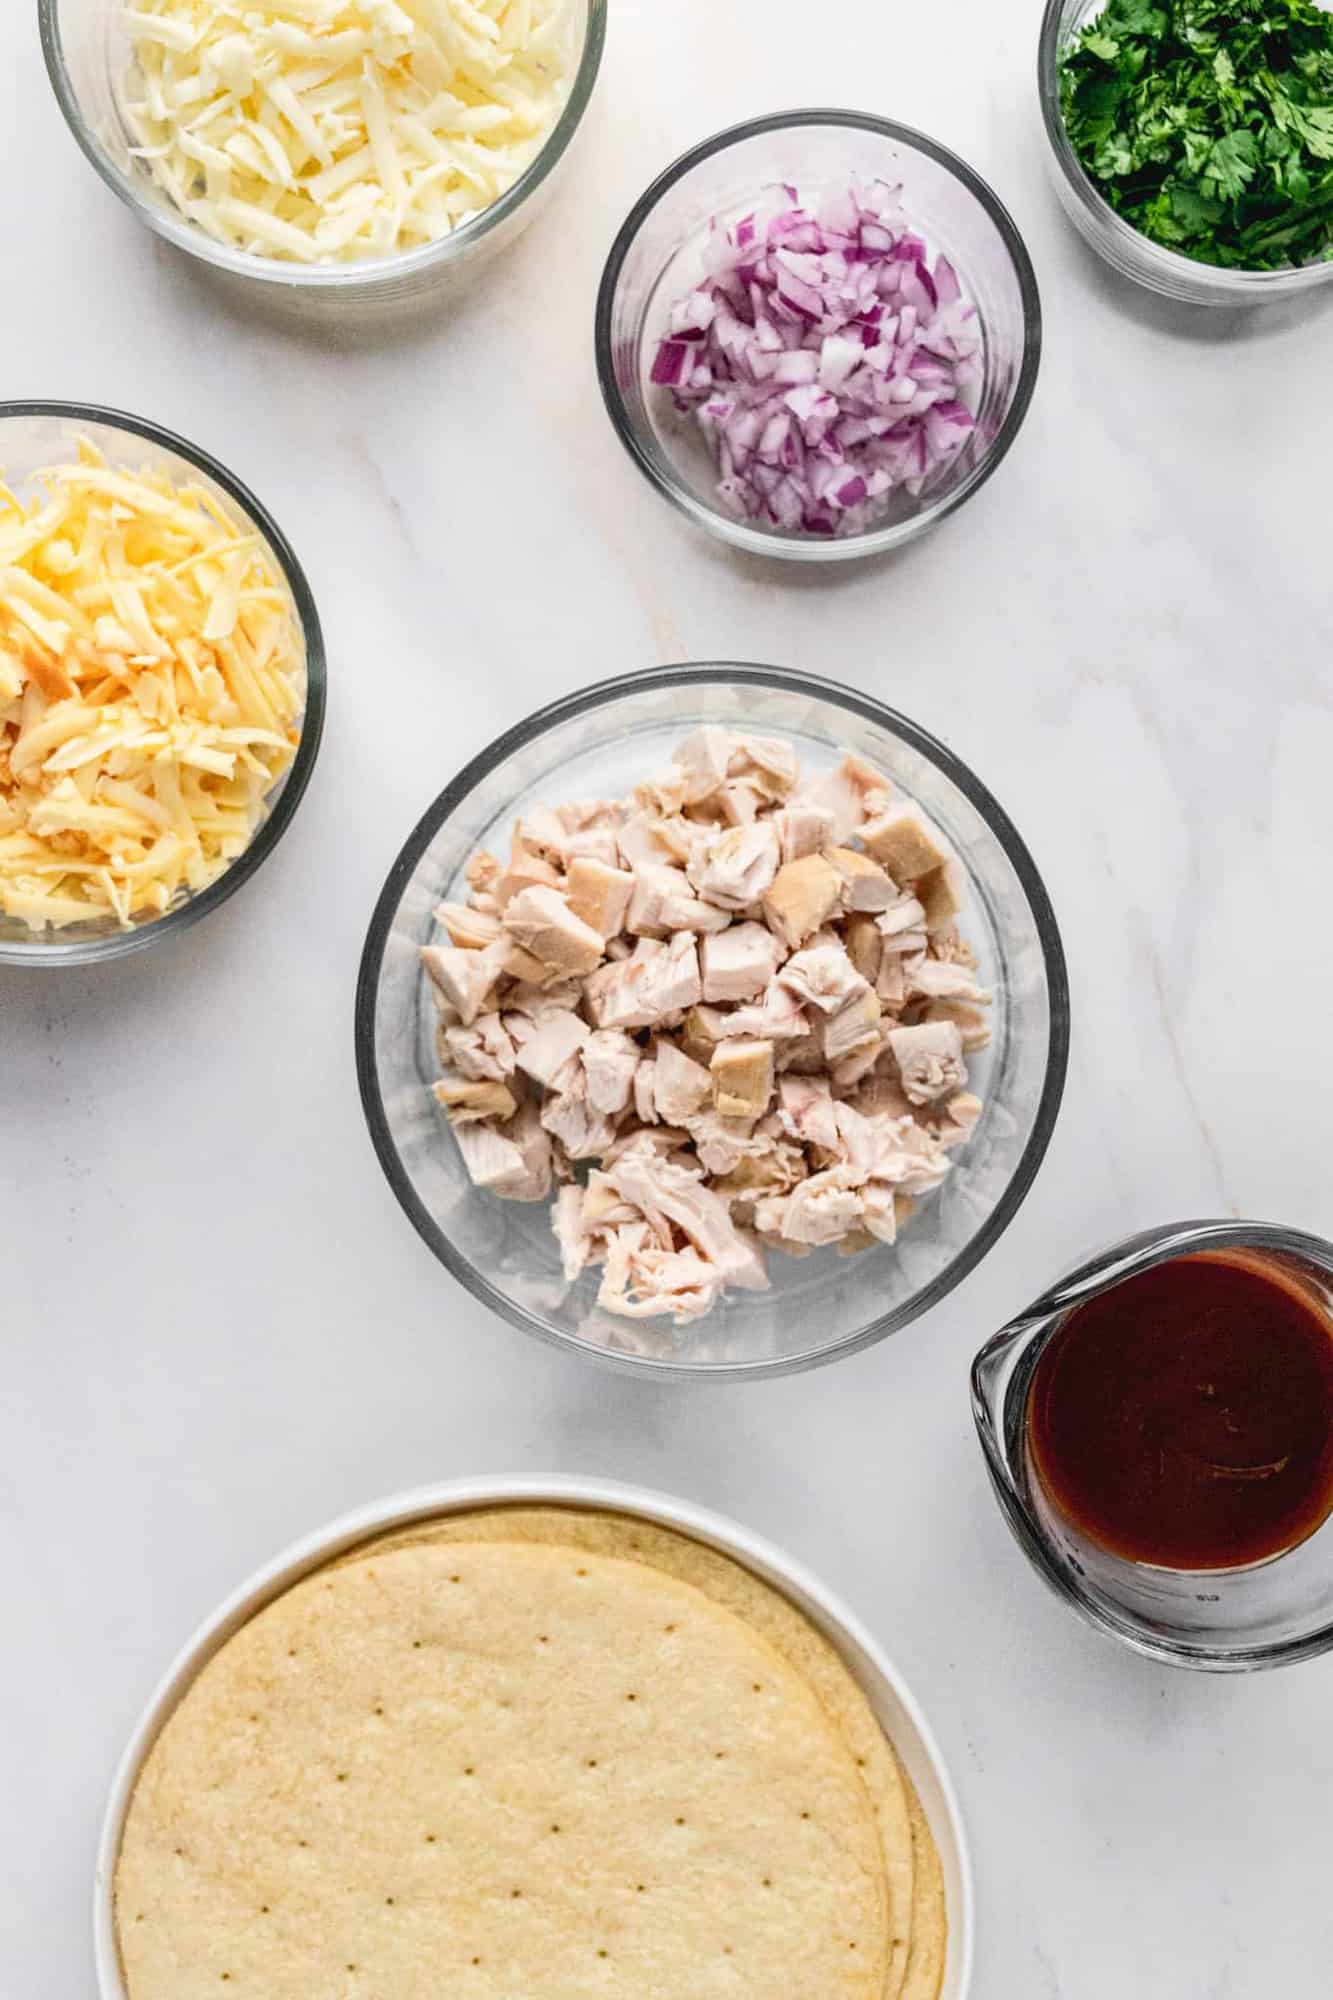 Ingredients for BBQ Chicken Pizza in varying bowl and plate sizes.